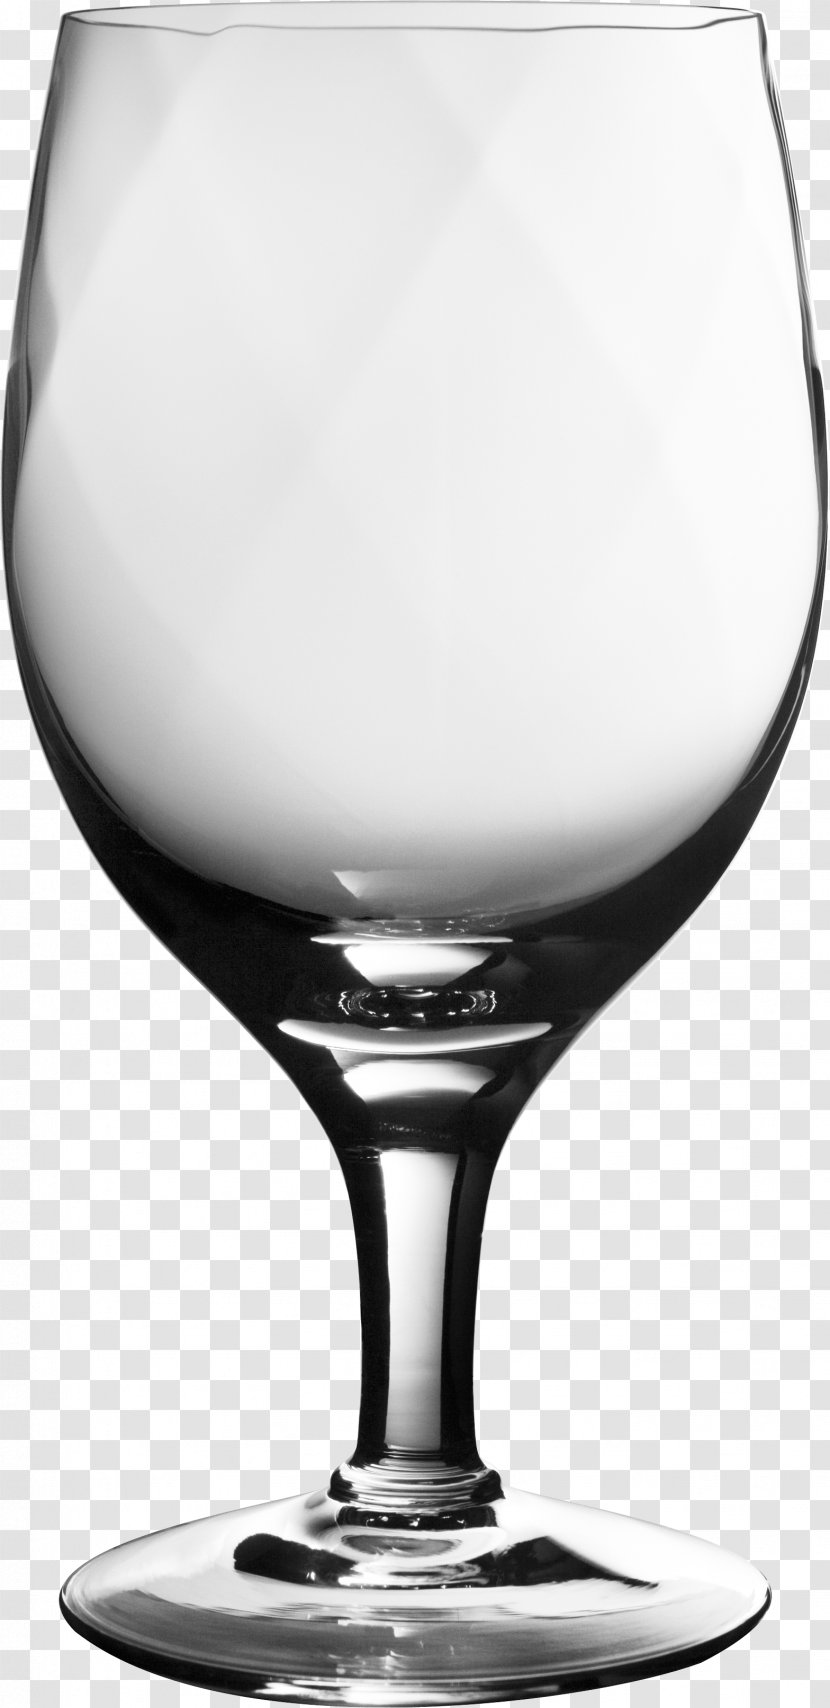 Magnifying Glass - Black And White - Empty Wine Image Transparent PNG